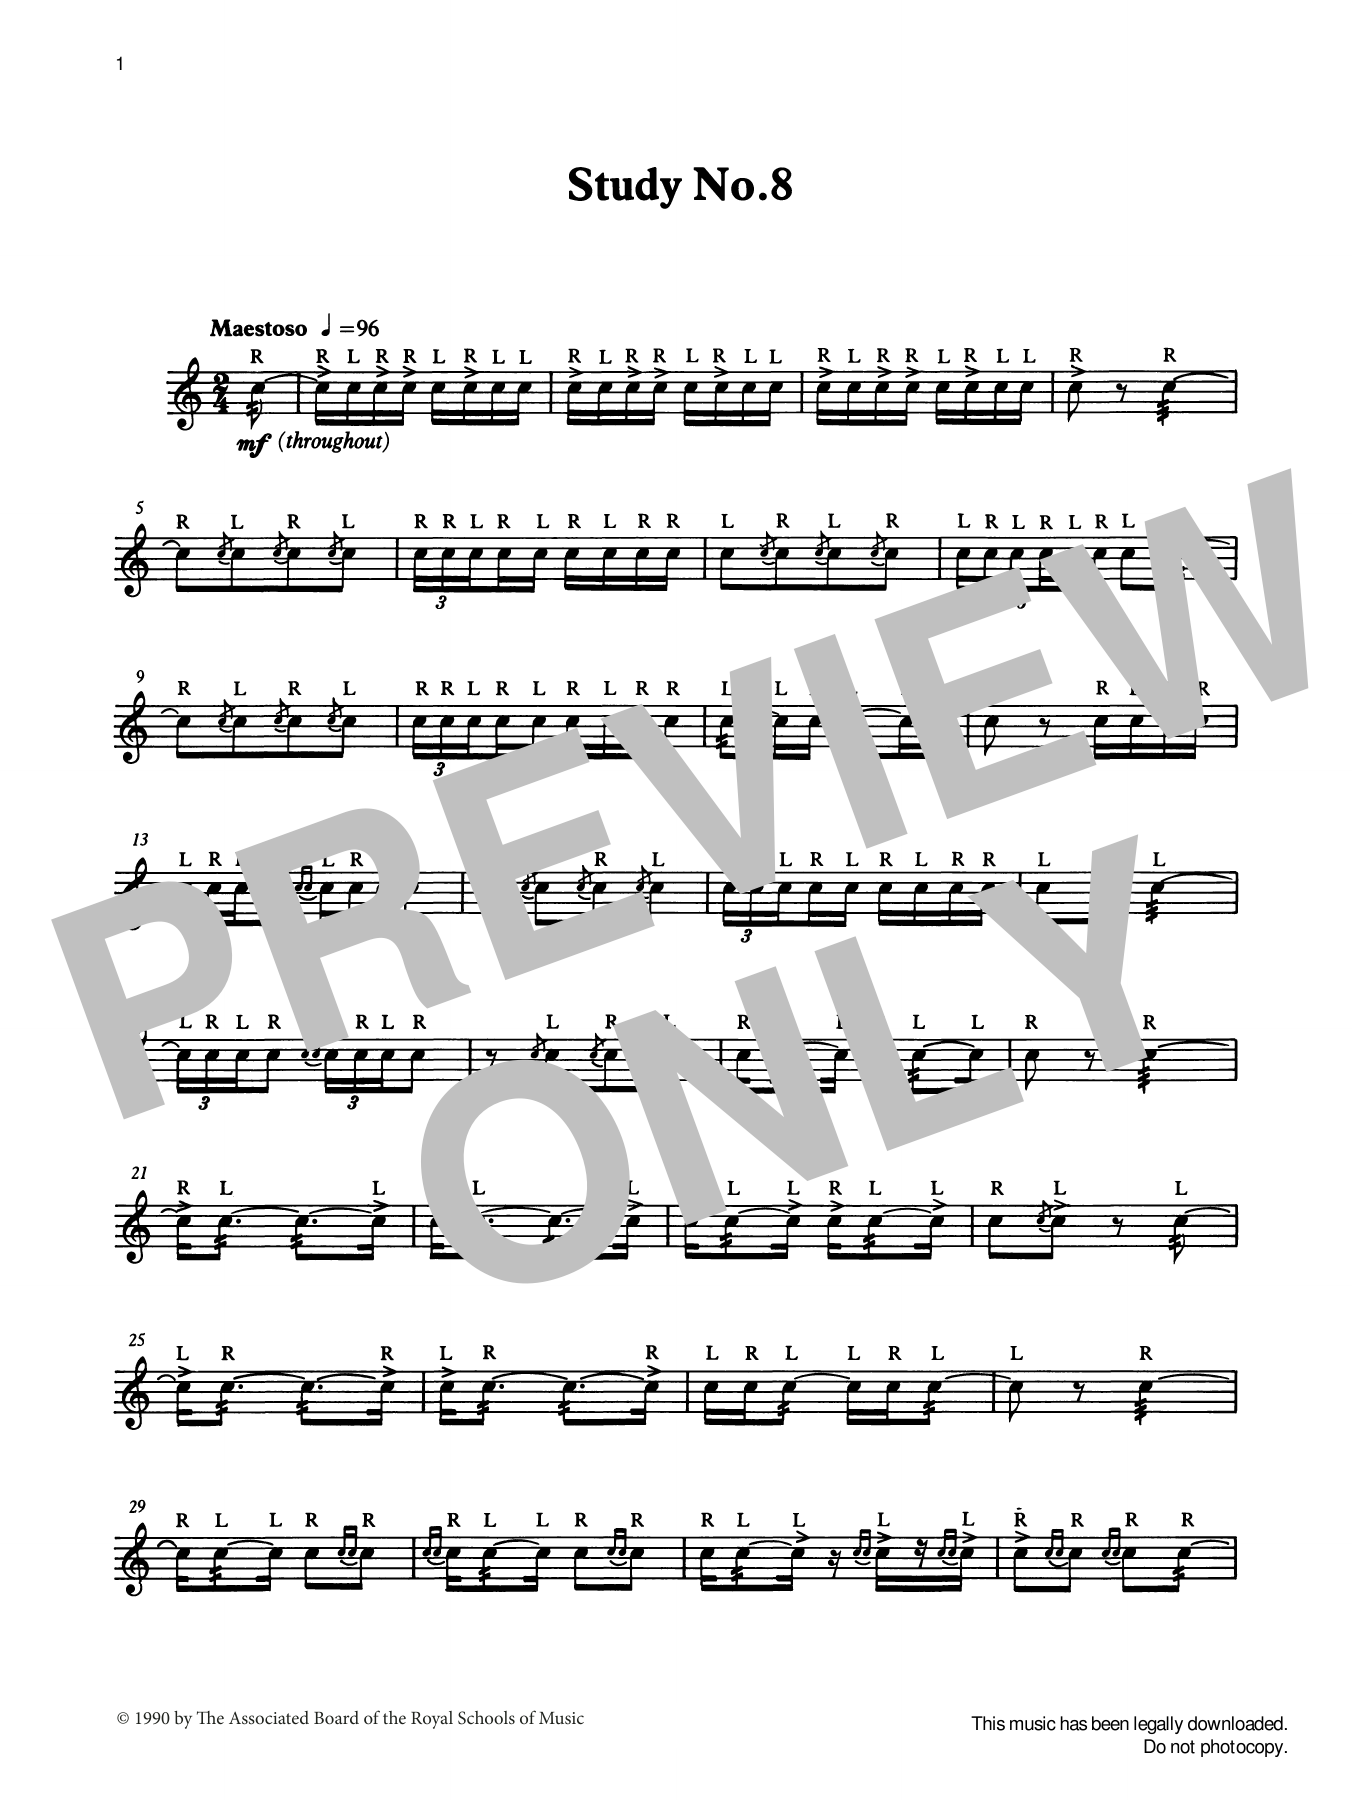 Download Ian Wright and Kevin Hathaway Study No.8 from Graded Music for Snare Sheet Music